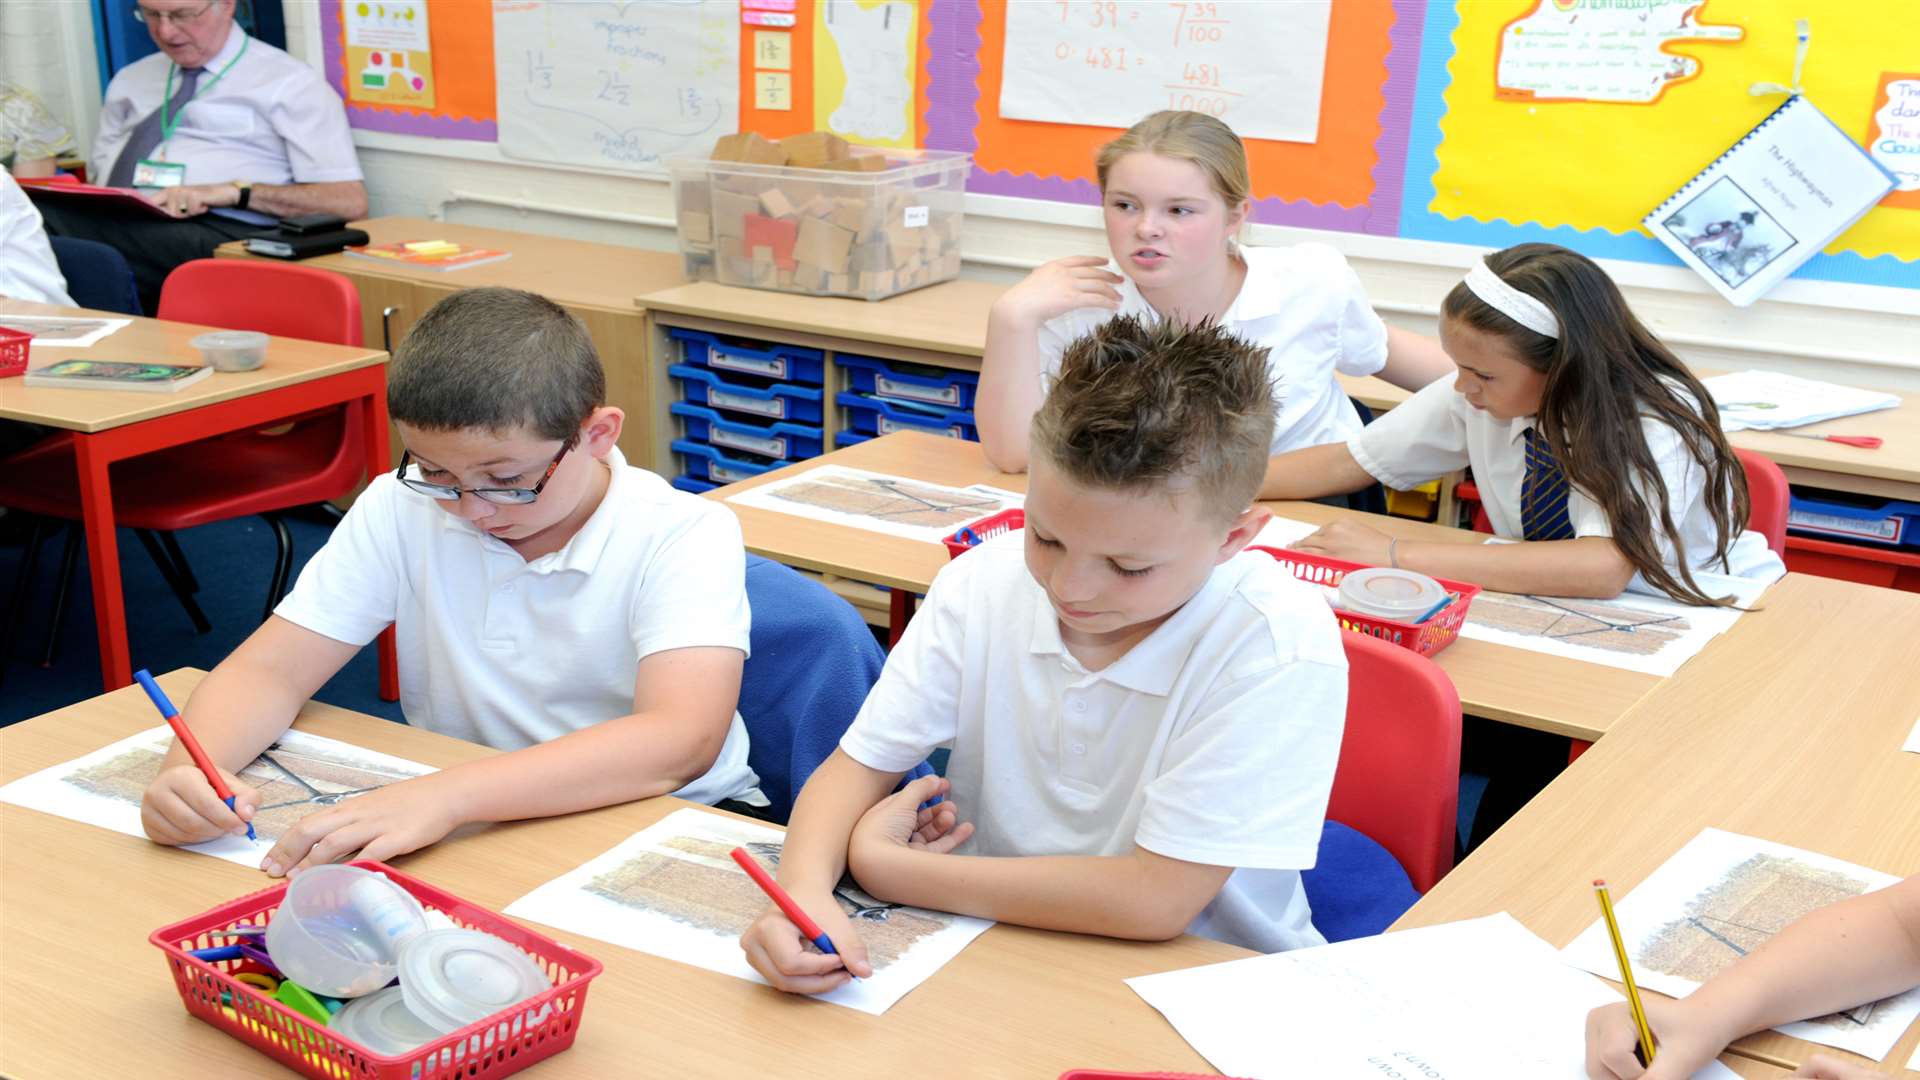 Primary pupils. Library image.